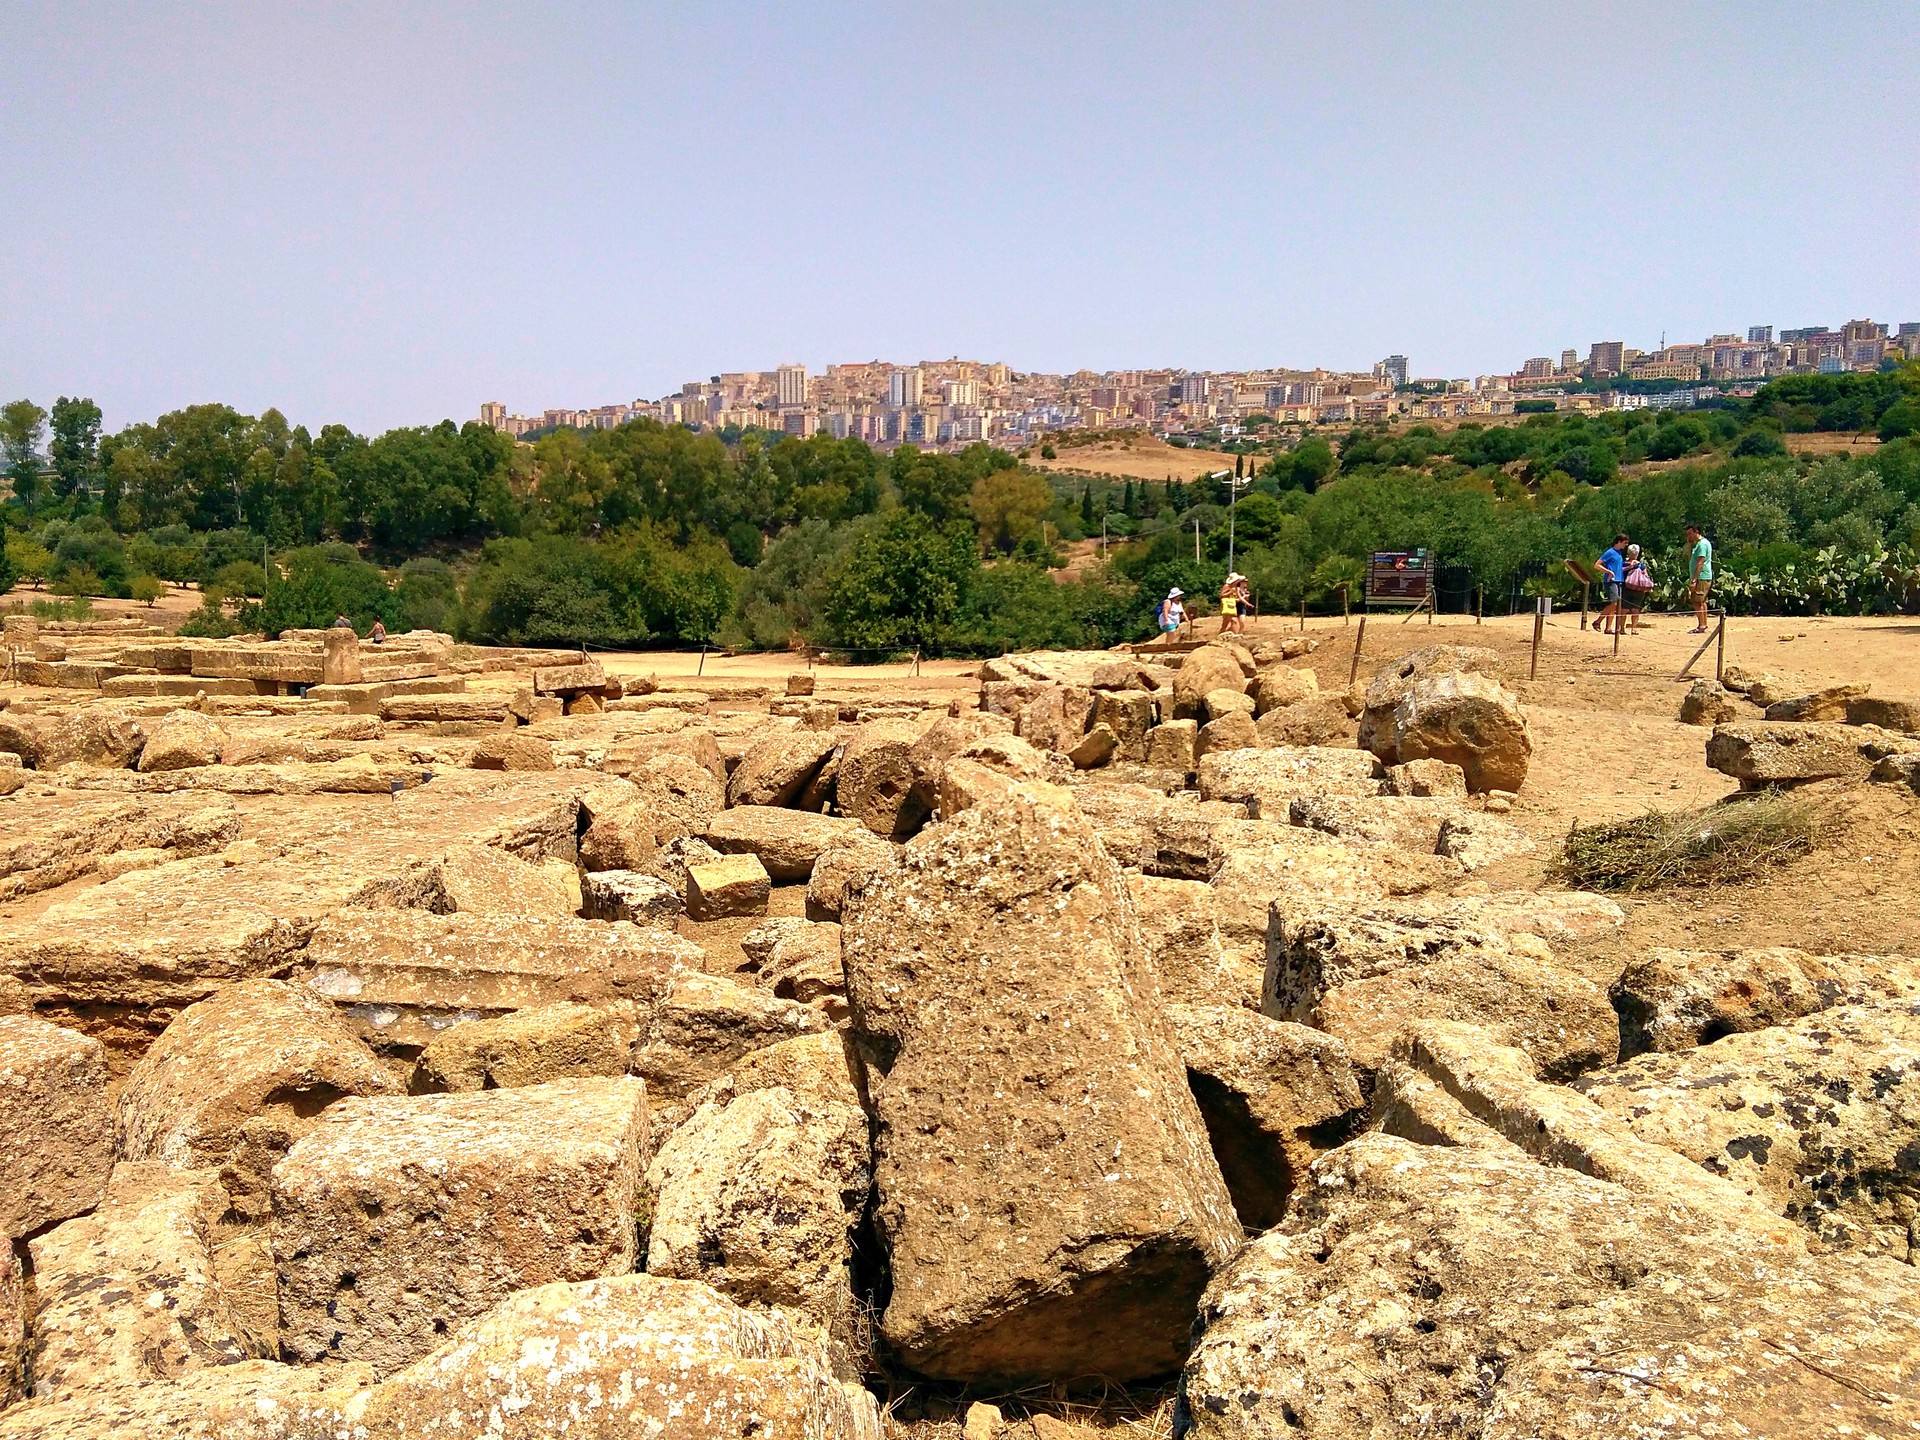 trip-valley-temples-agrigento-c636790a3b